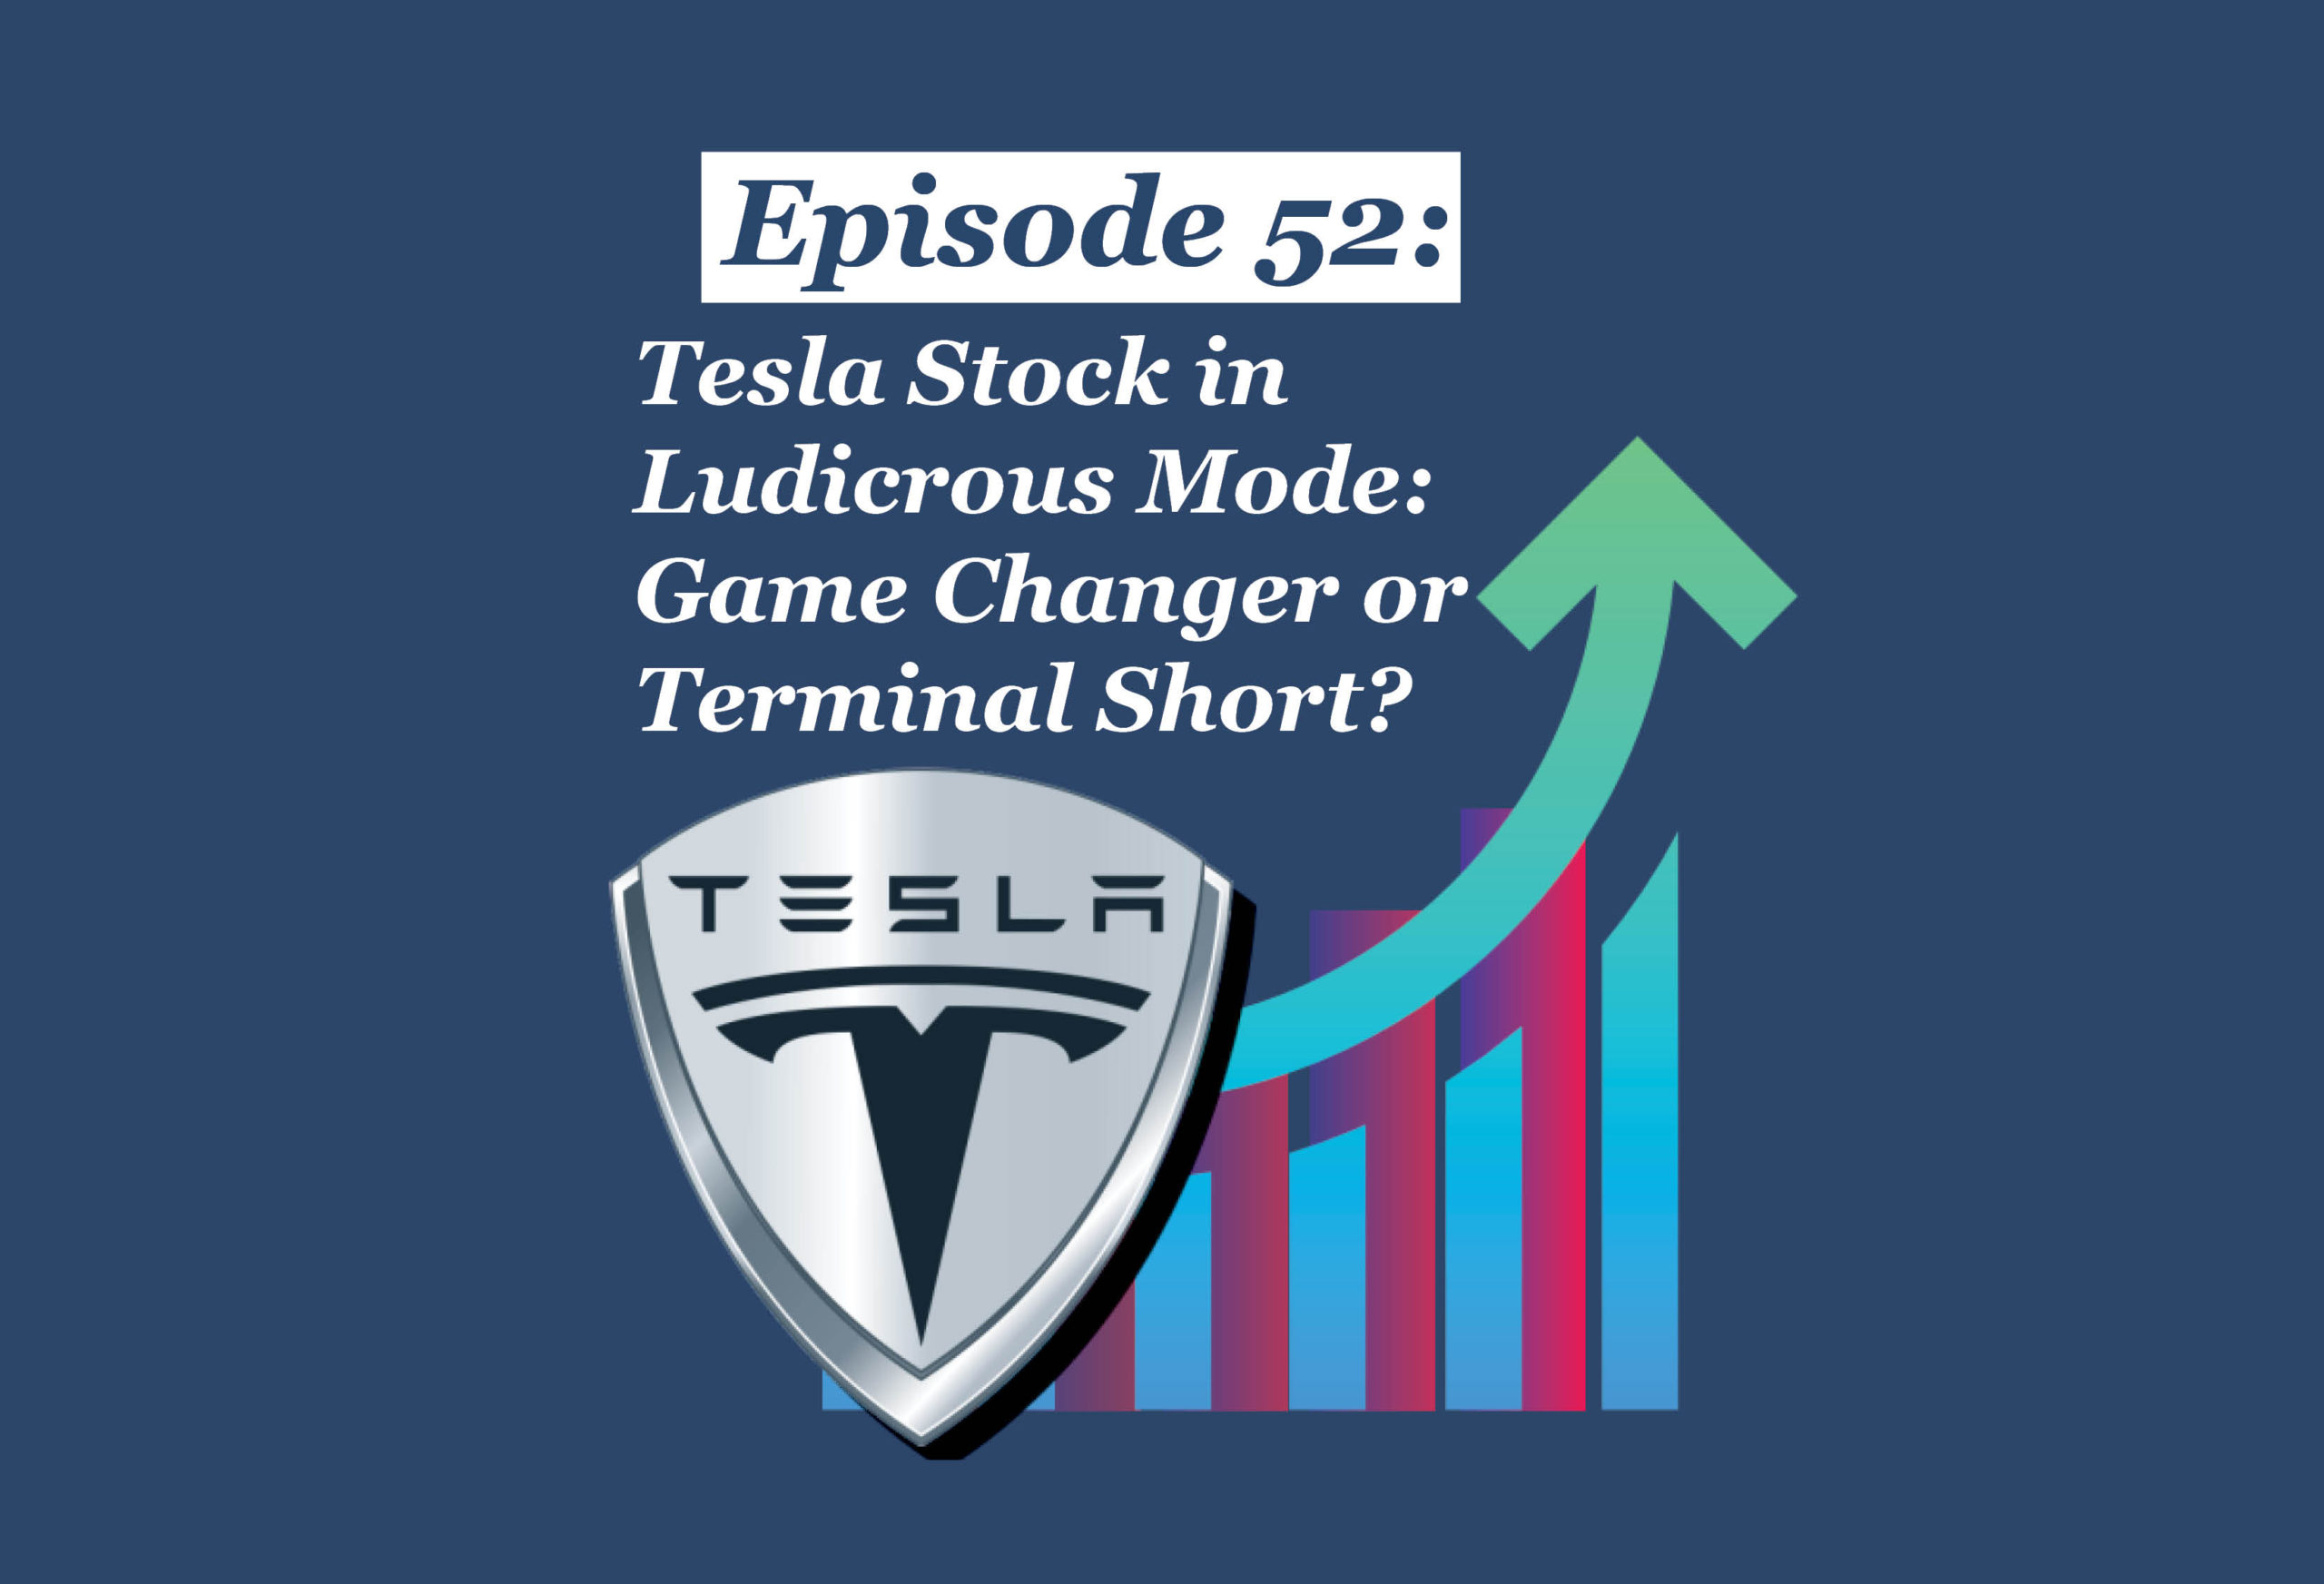 Absolute Return Podcast #52: Tesla Stock in Ludicrous Mode: Game Changer or Terminal Short?